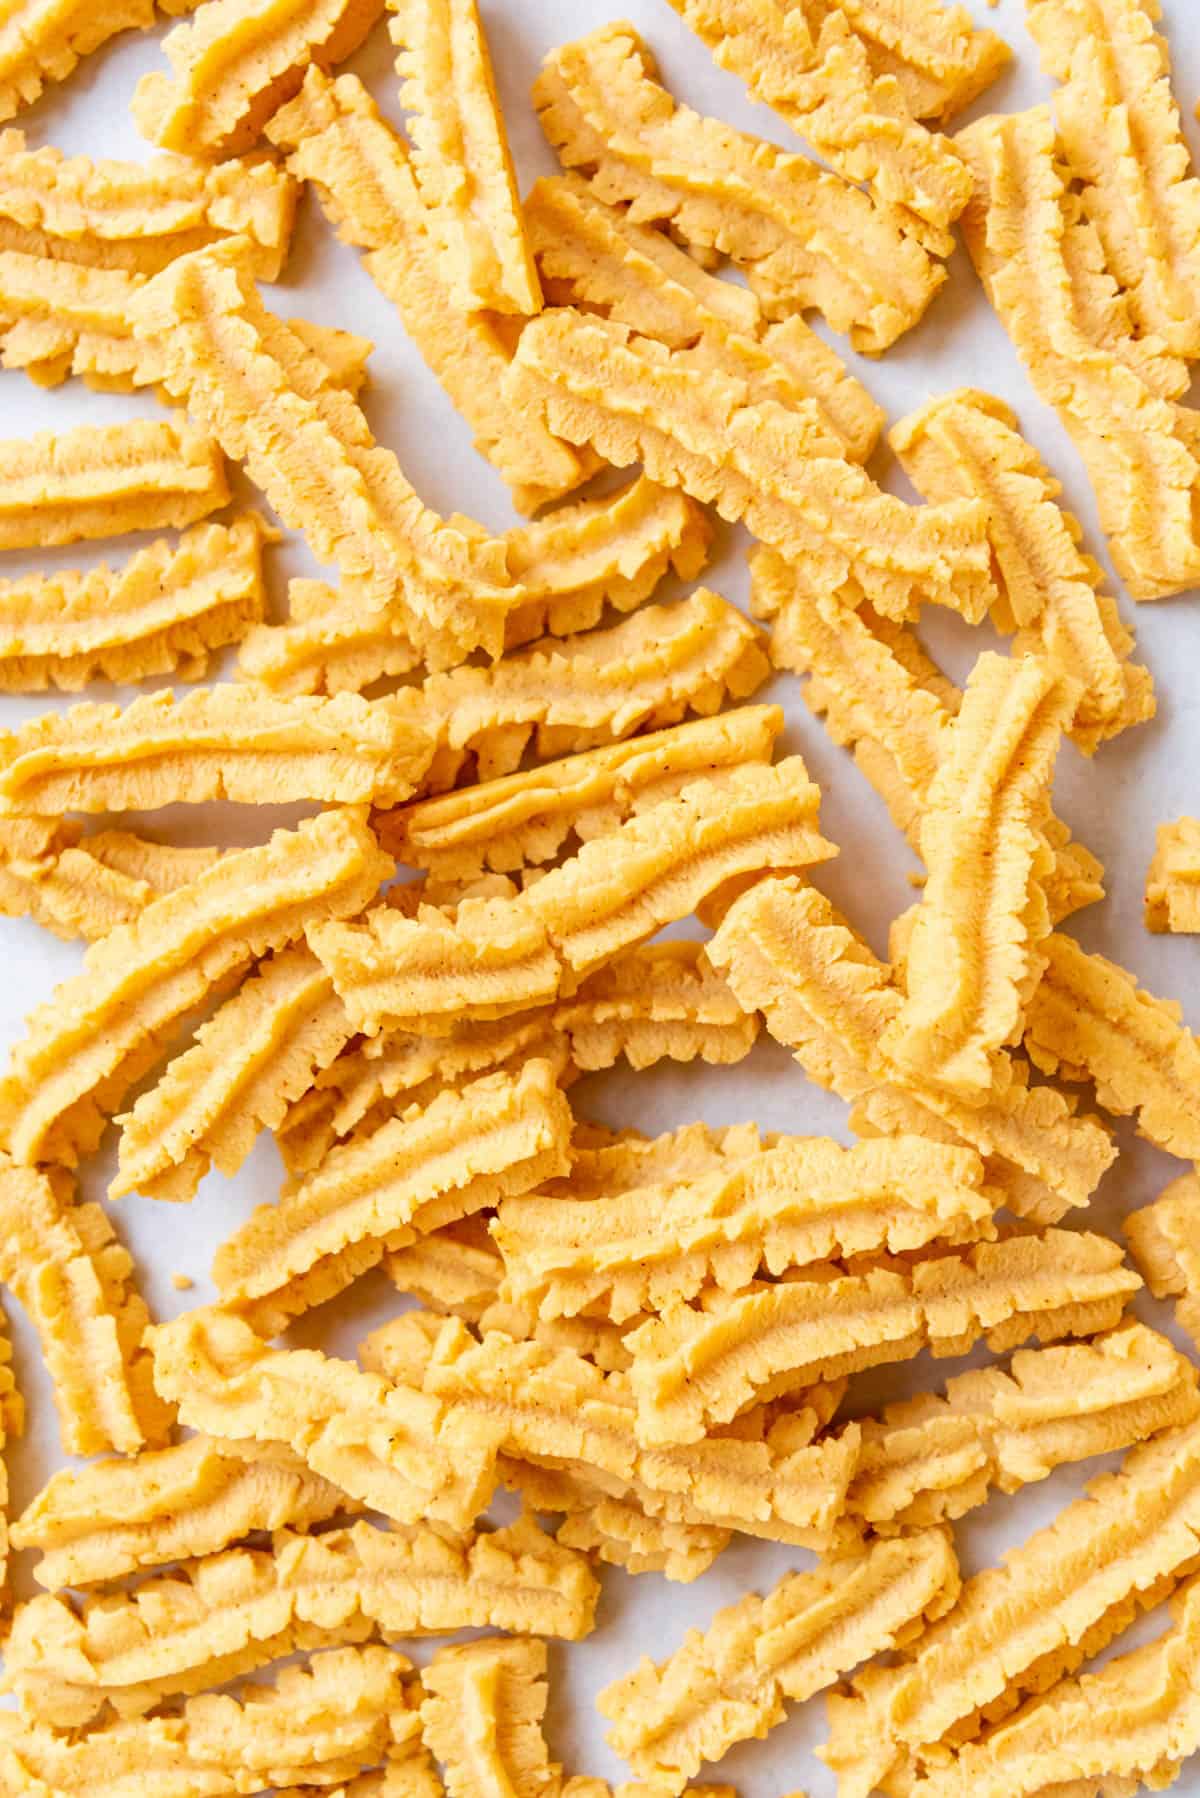 A close image of baked cheese straws.